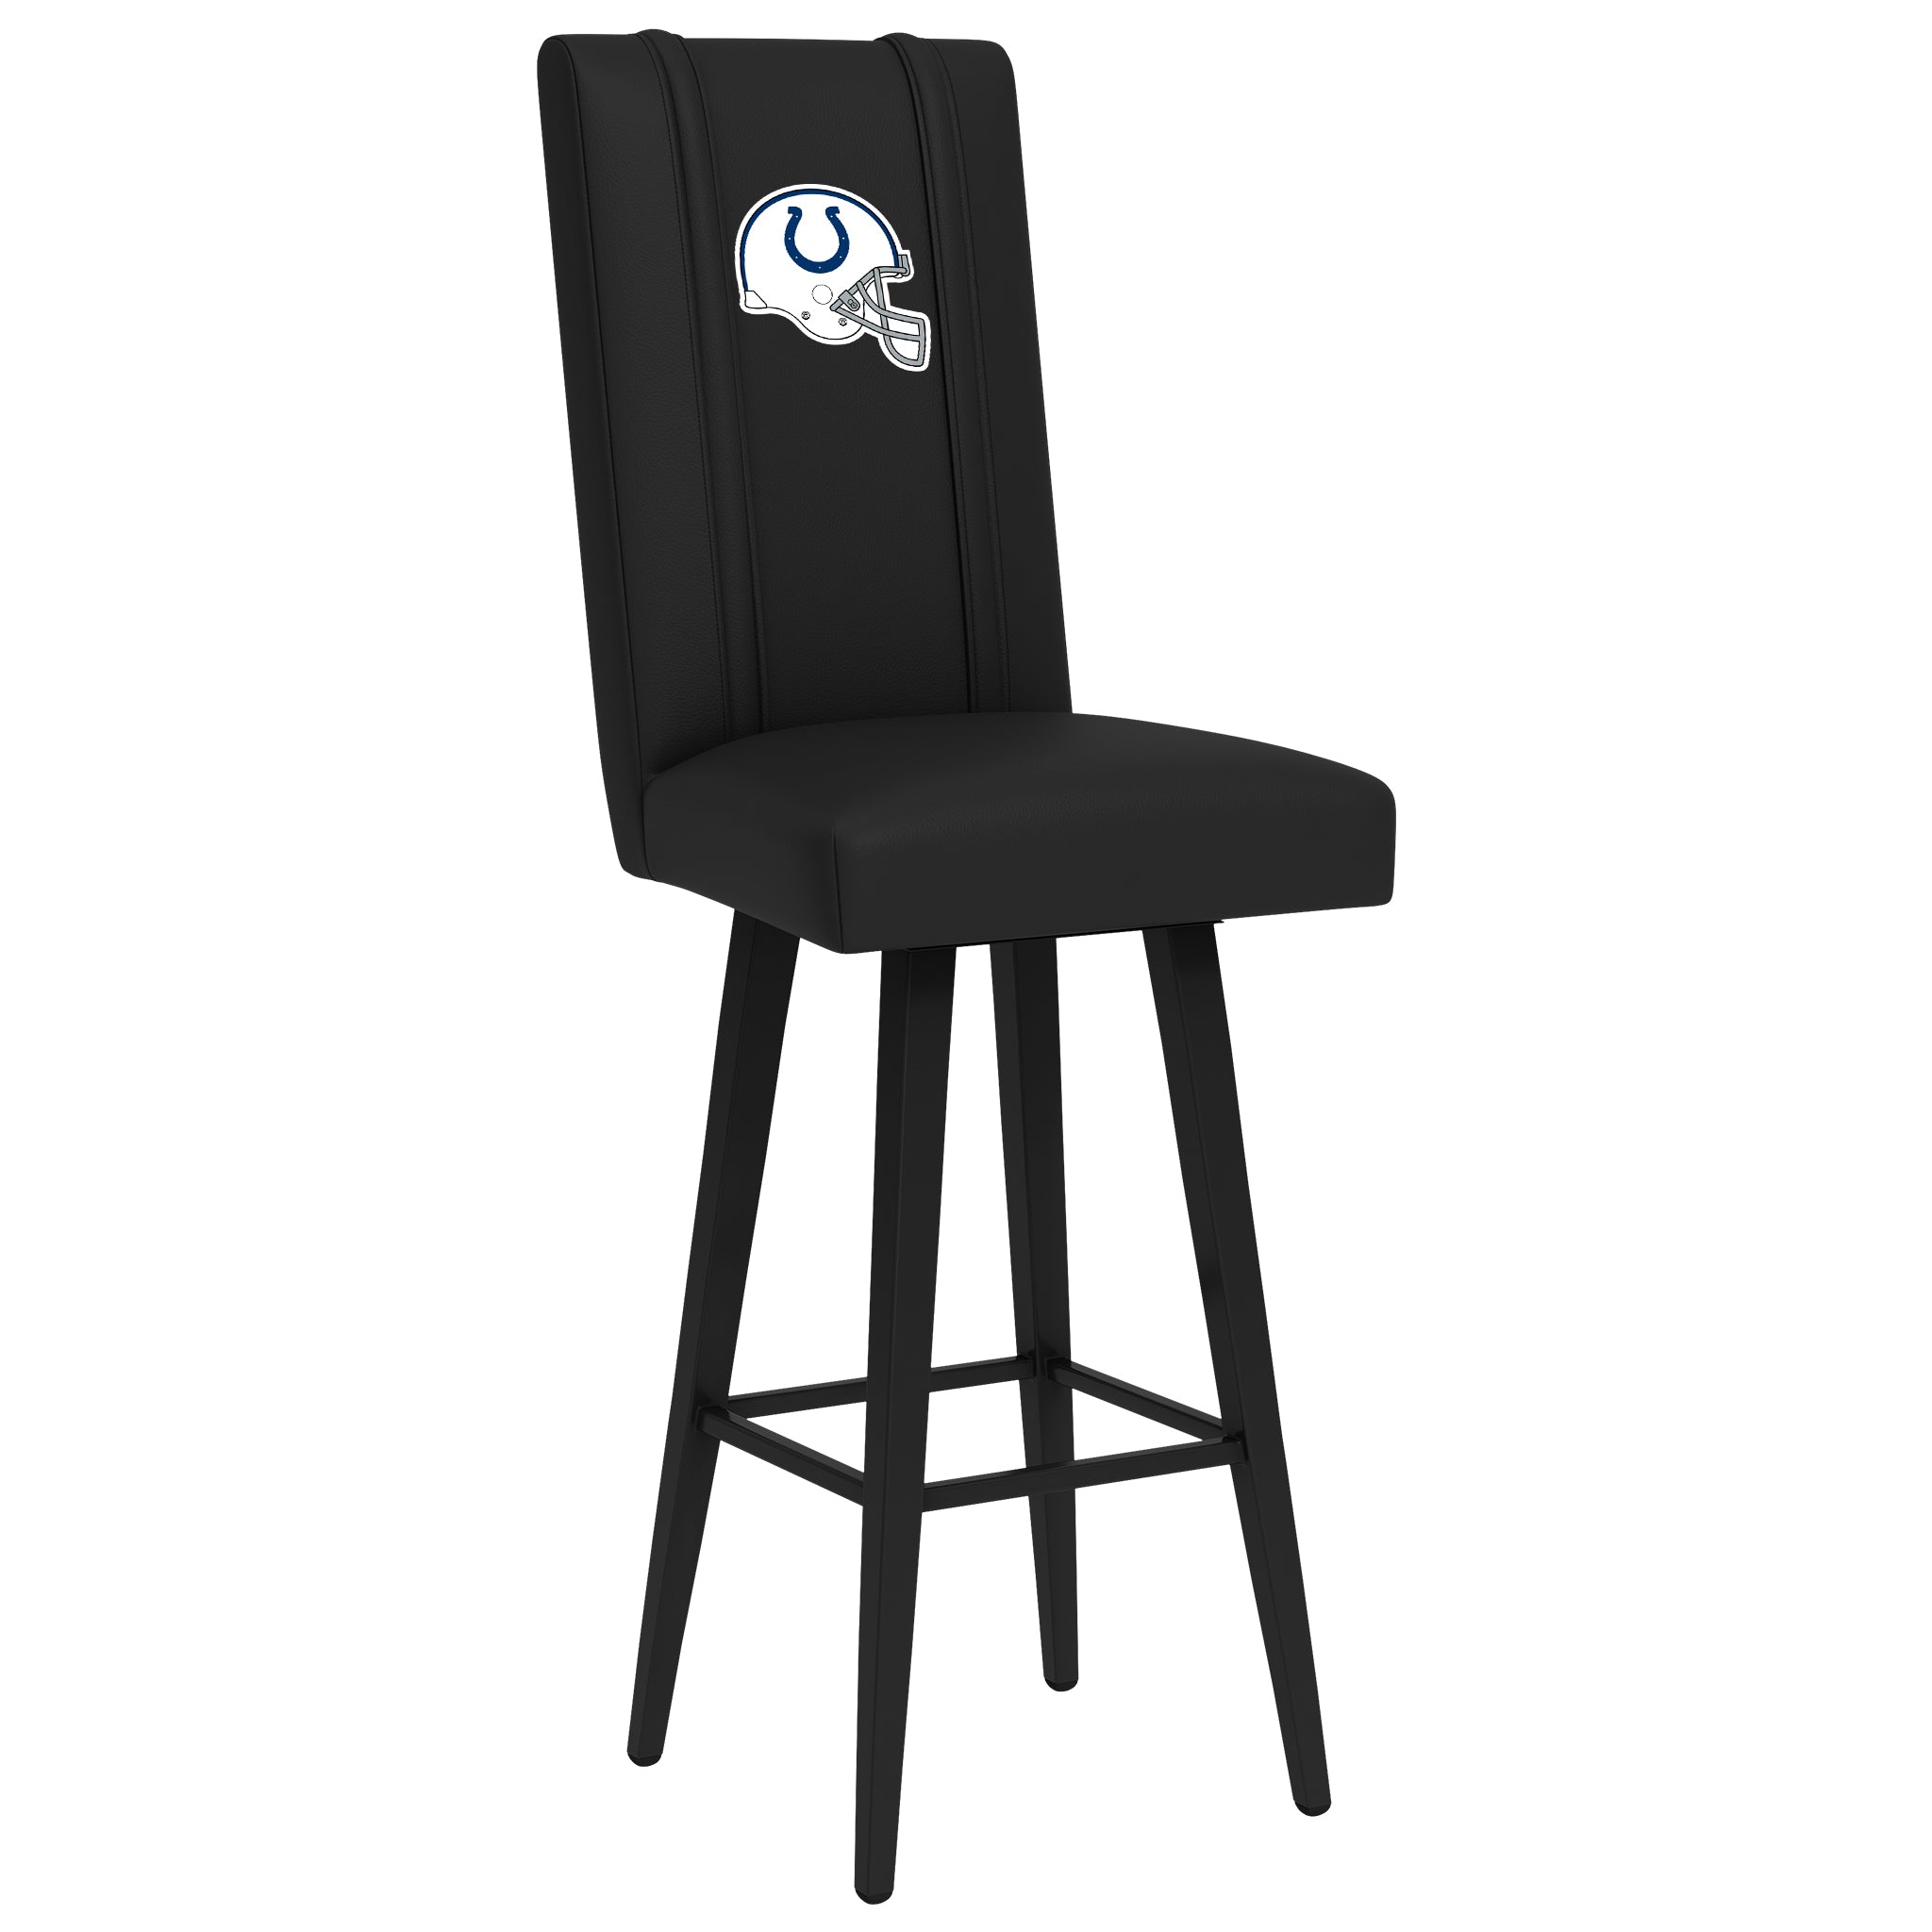 Indianapolis Colts Swivel Bar Stool - Chair - Furniture - Kitchen